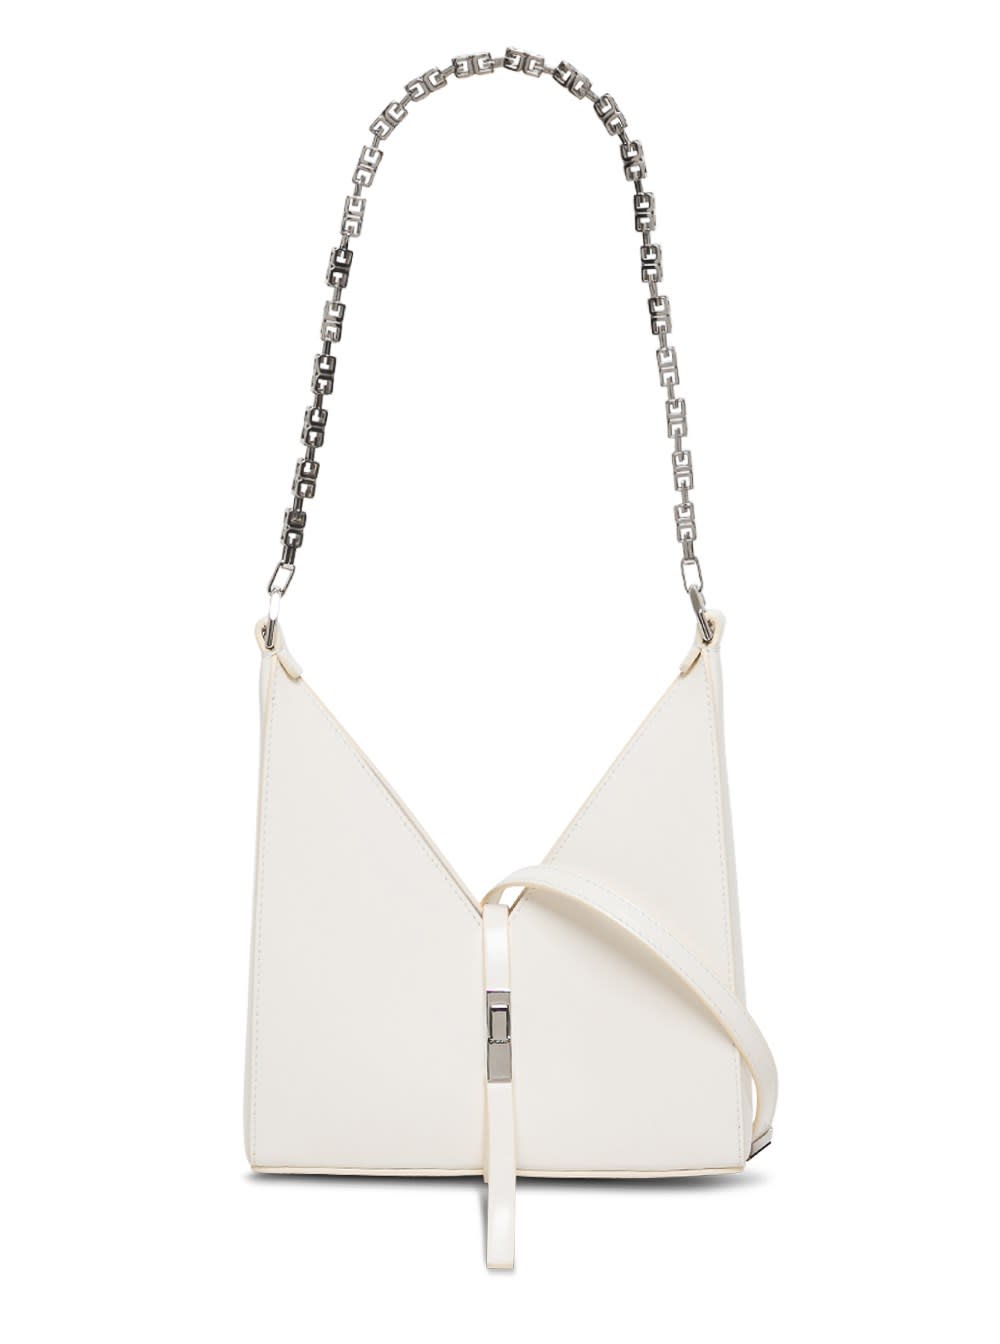 Givenchy Cut Out Crossbody Bag In White Leather